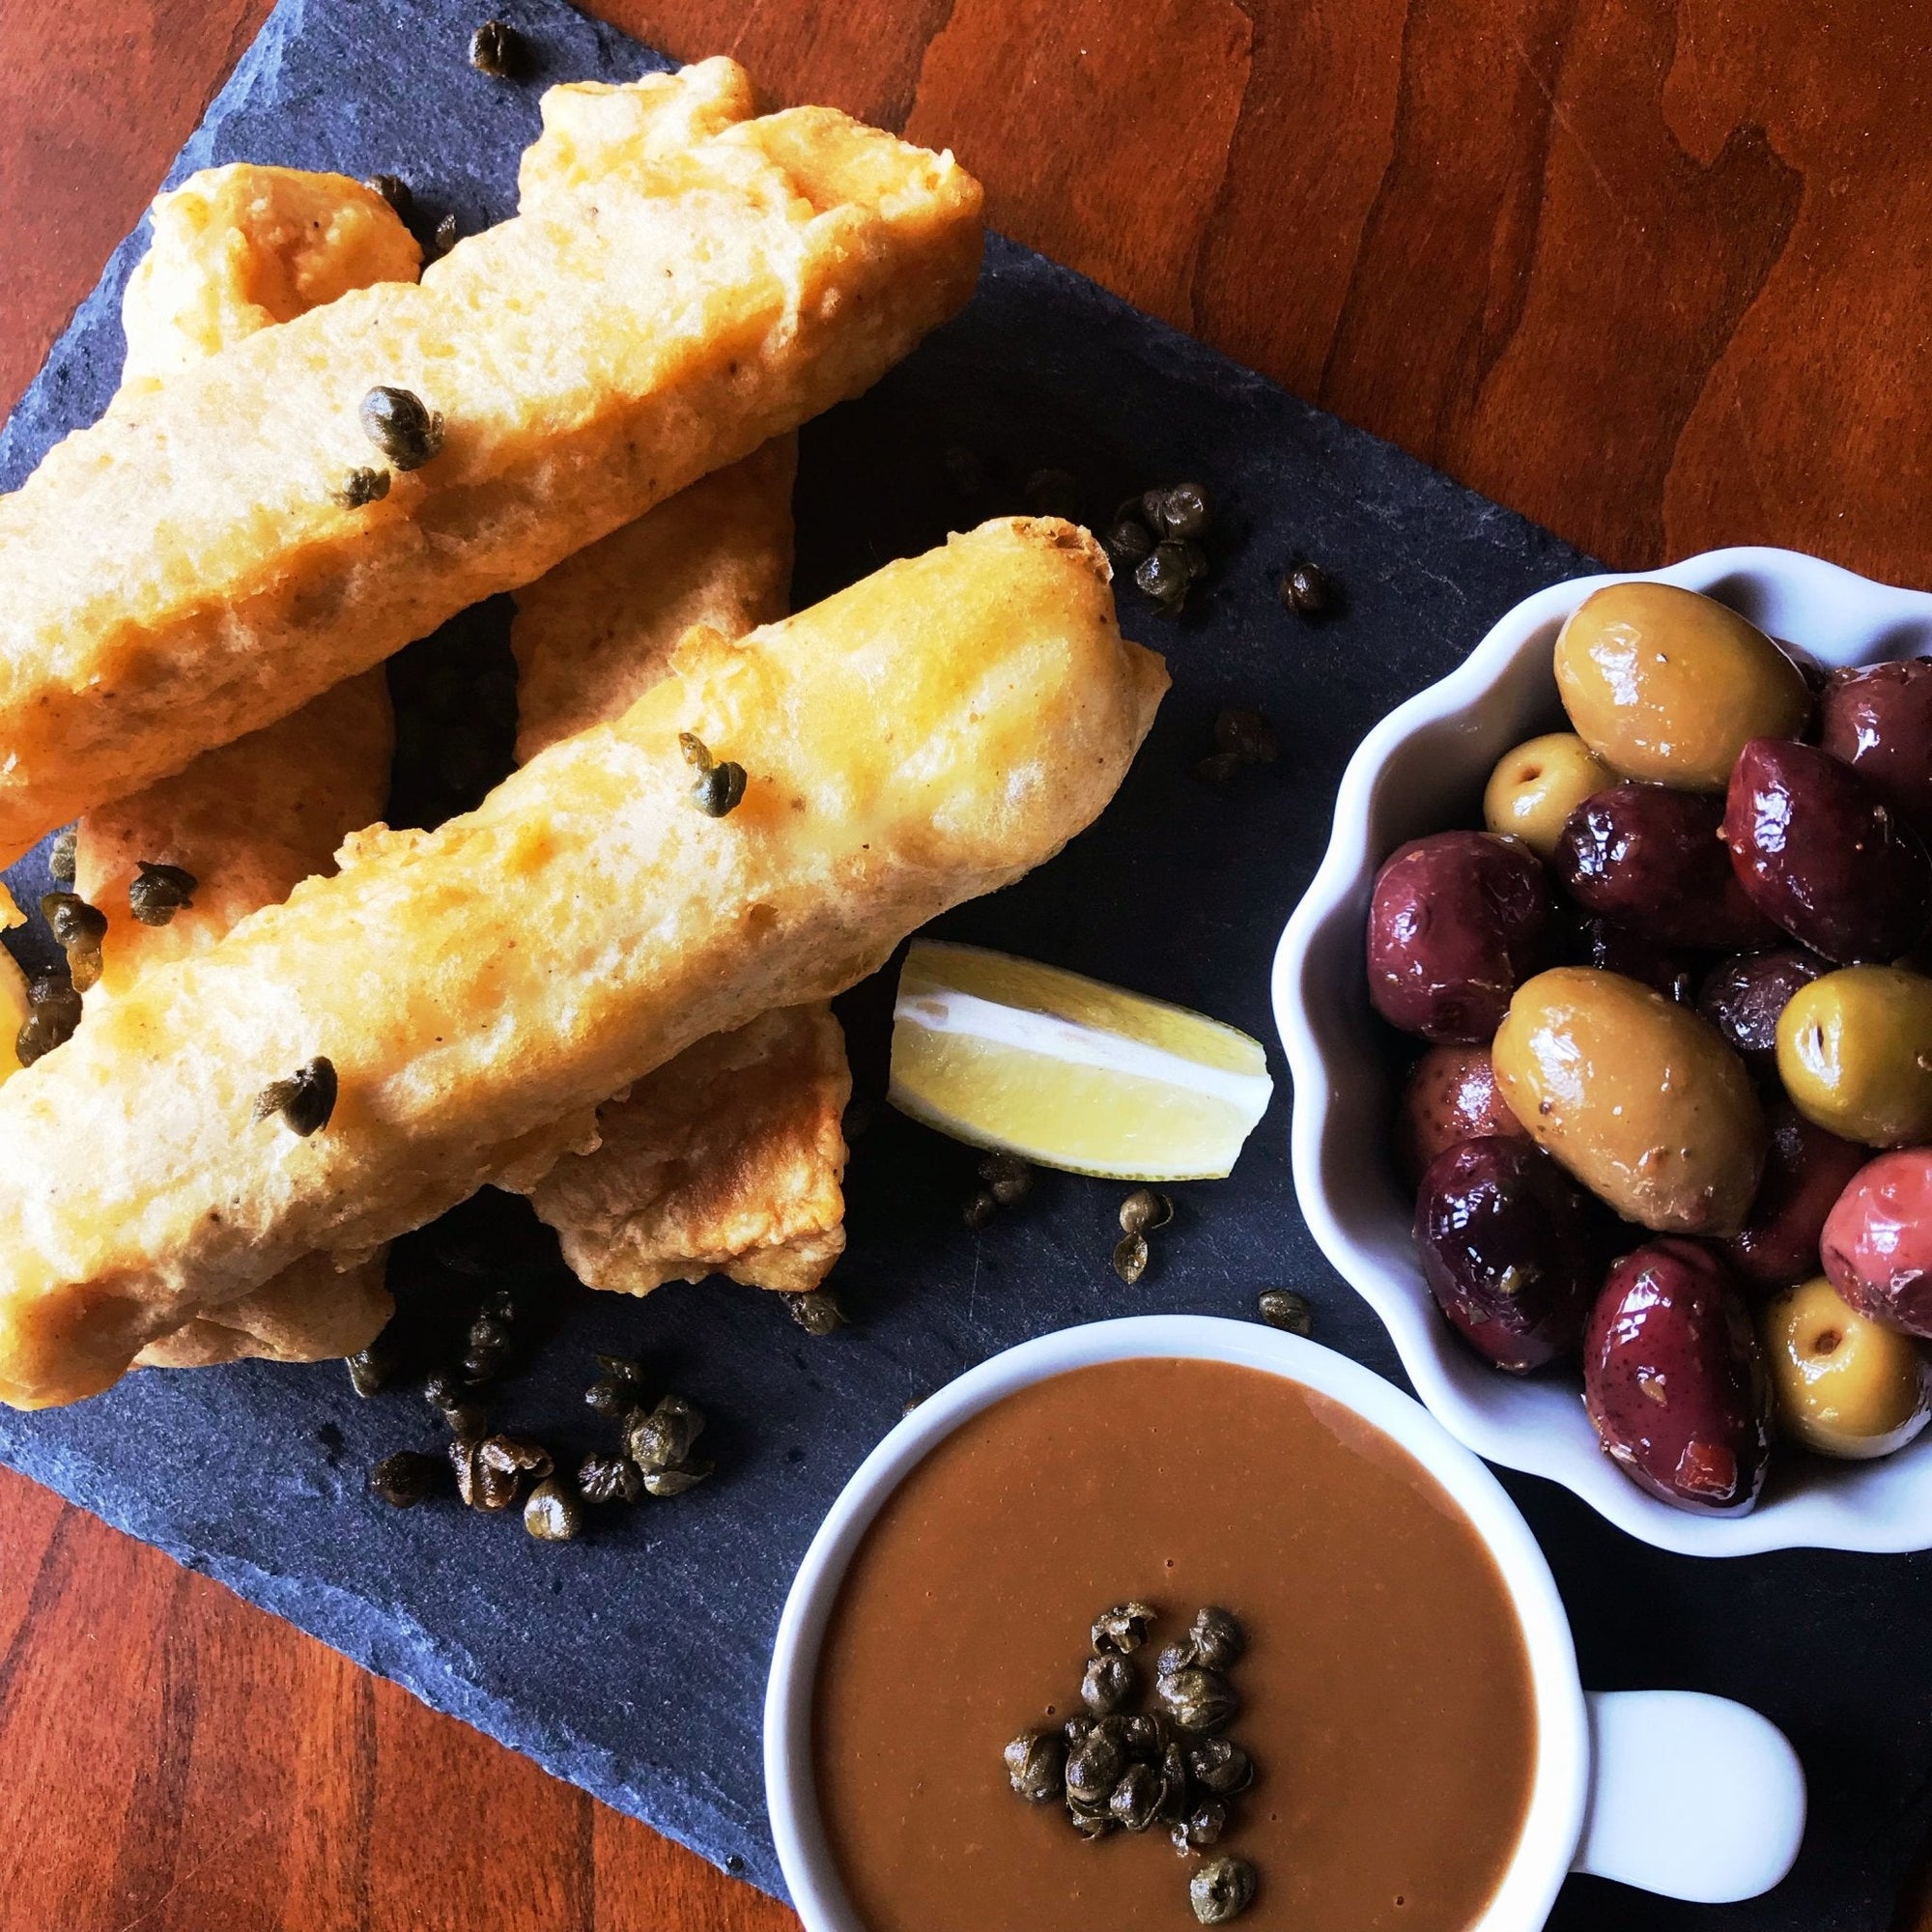 Mediterranean Fried Fish with Balsamic Dijon Dipping Sauce - Texas Hill Country Olive Co.